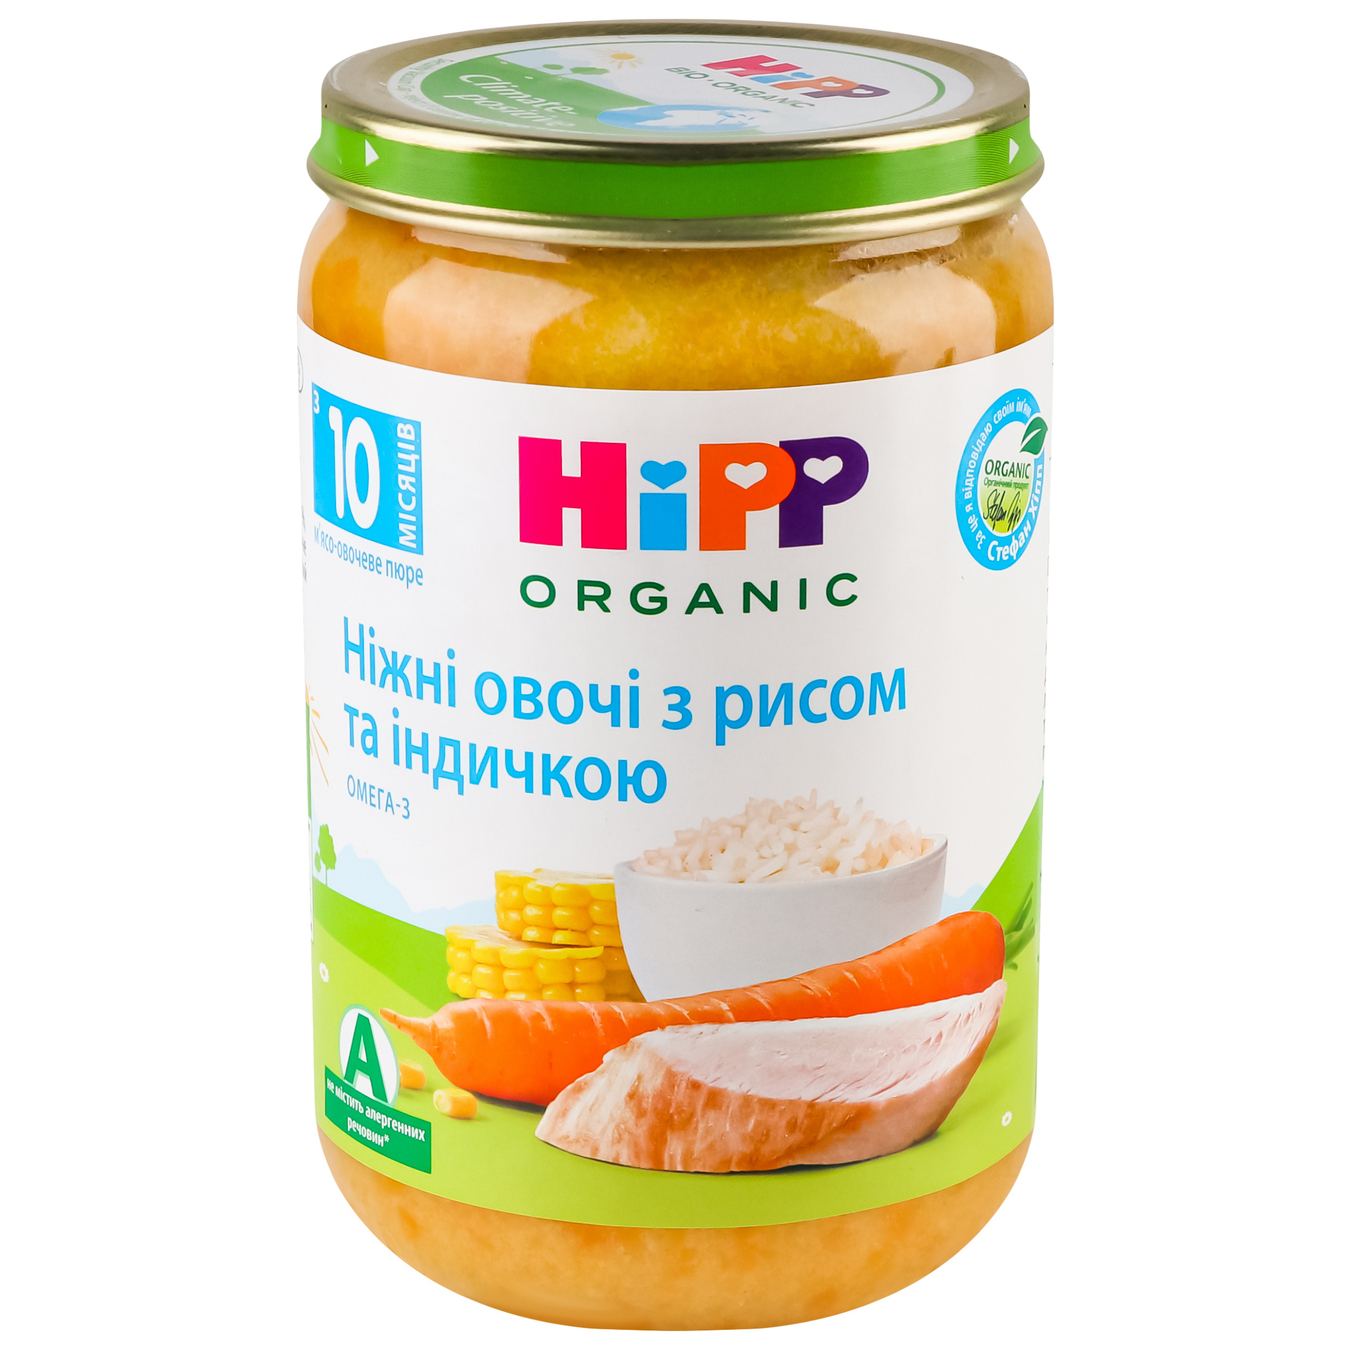 Baby puree HiPP Turkey in vegetables with rice for 12+ month old babies glass jar 220g Hungary 2